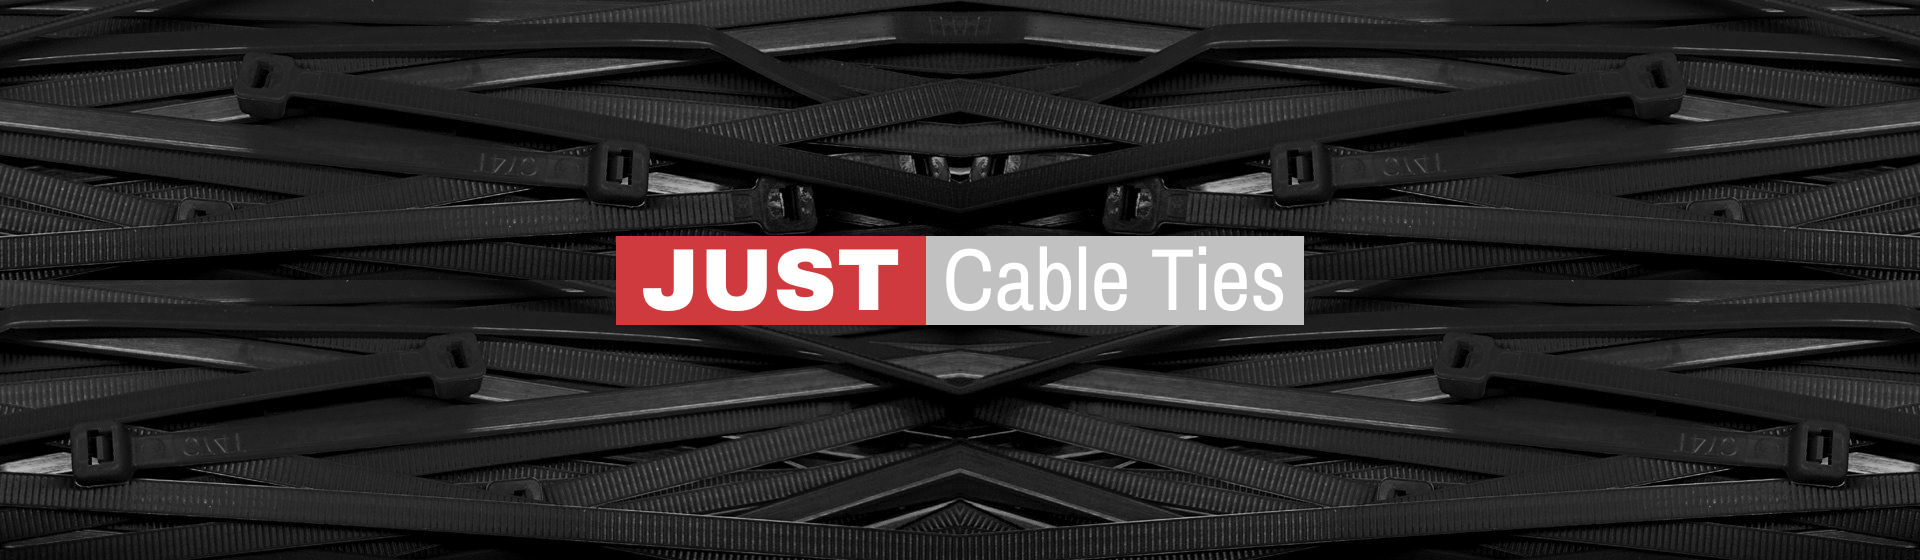 just cable ties